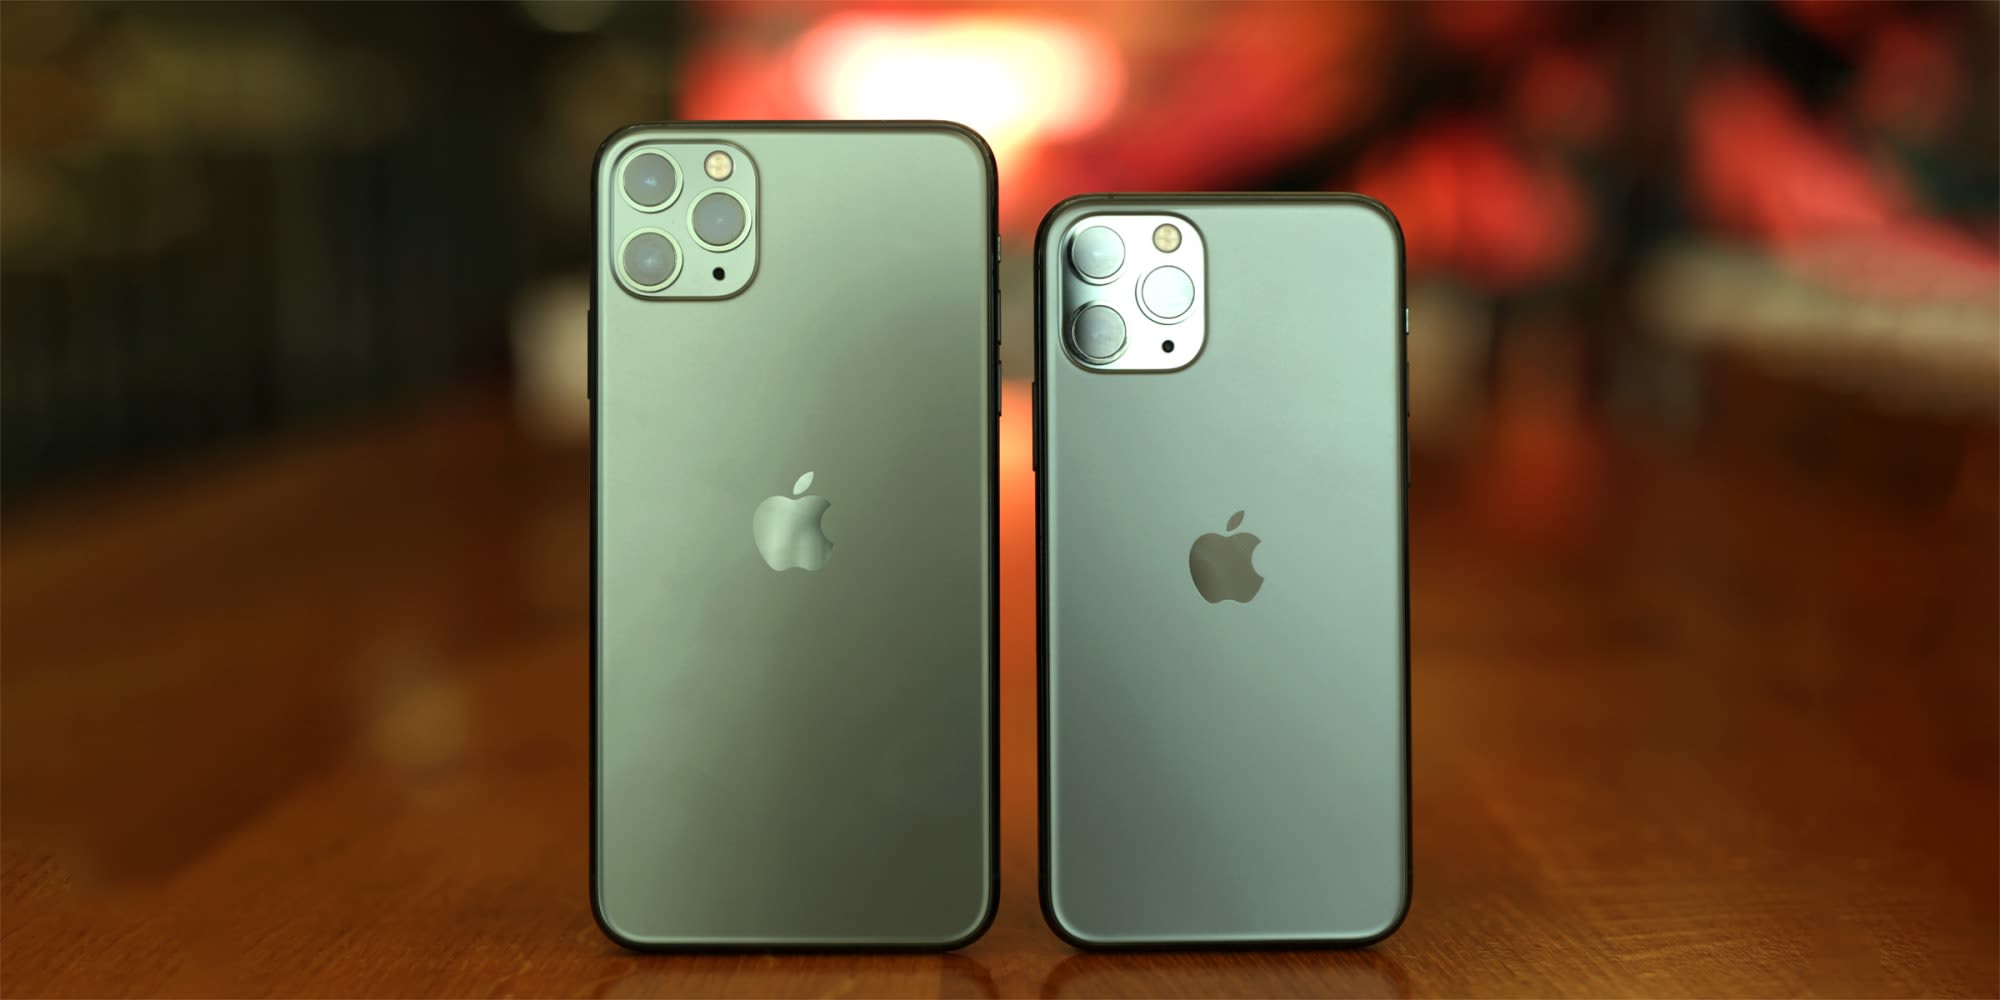 Iphone 11 And 11 Pro In All Their New Vibrant Colors Cnet